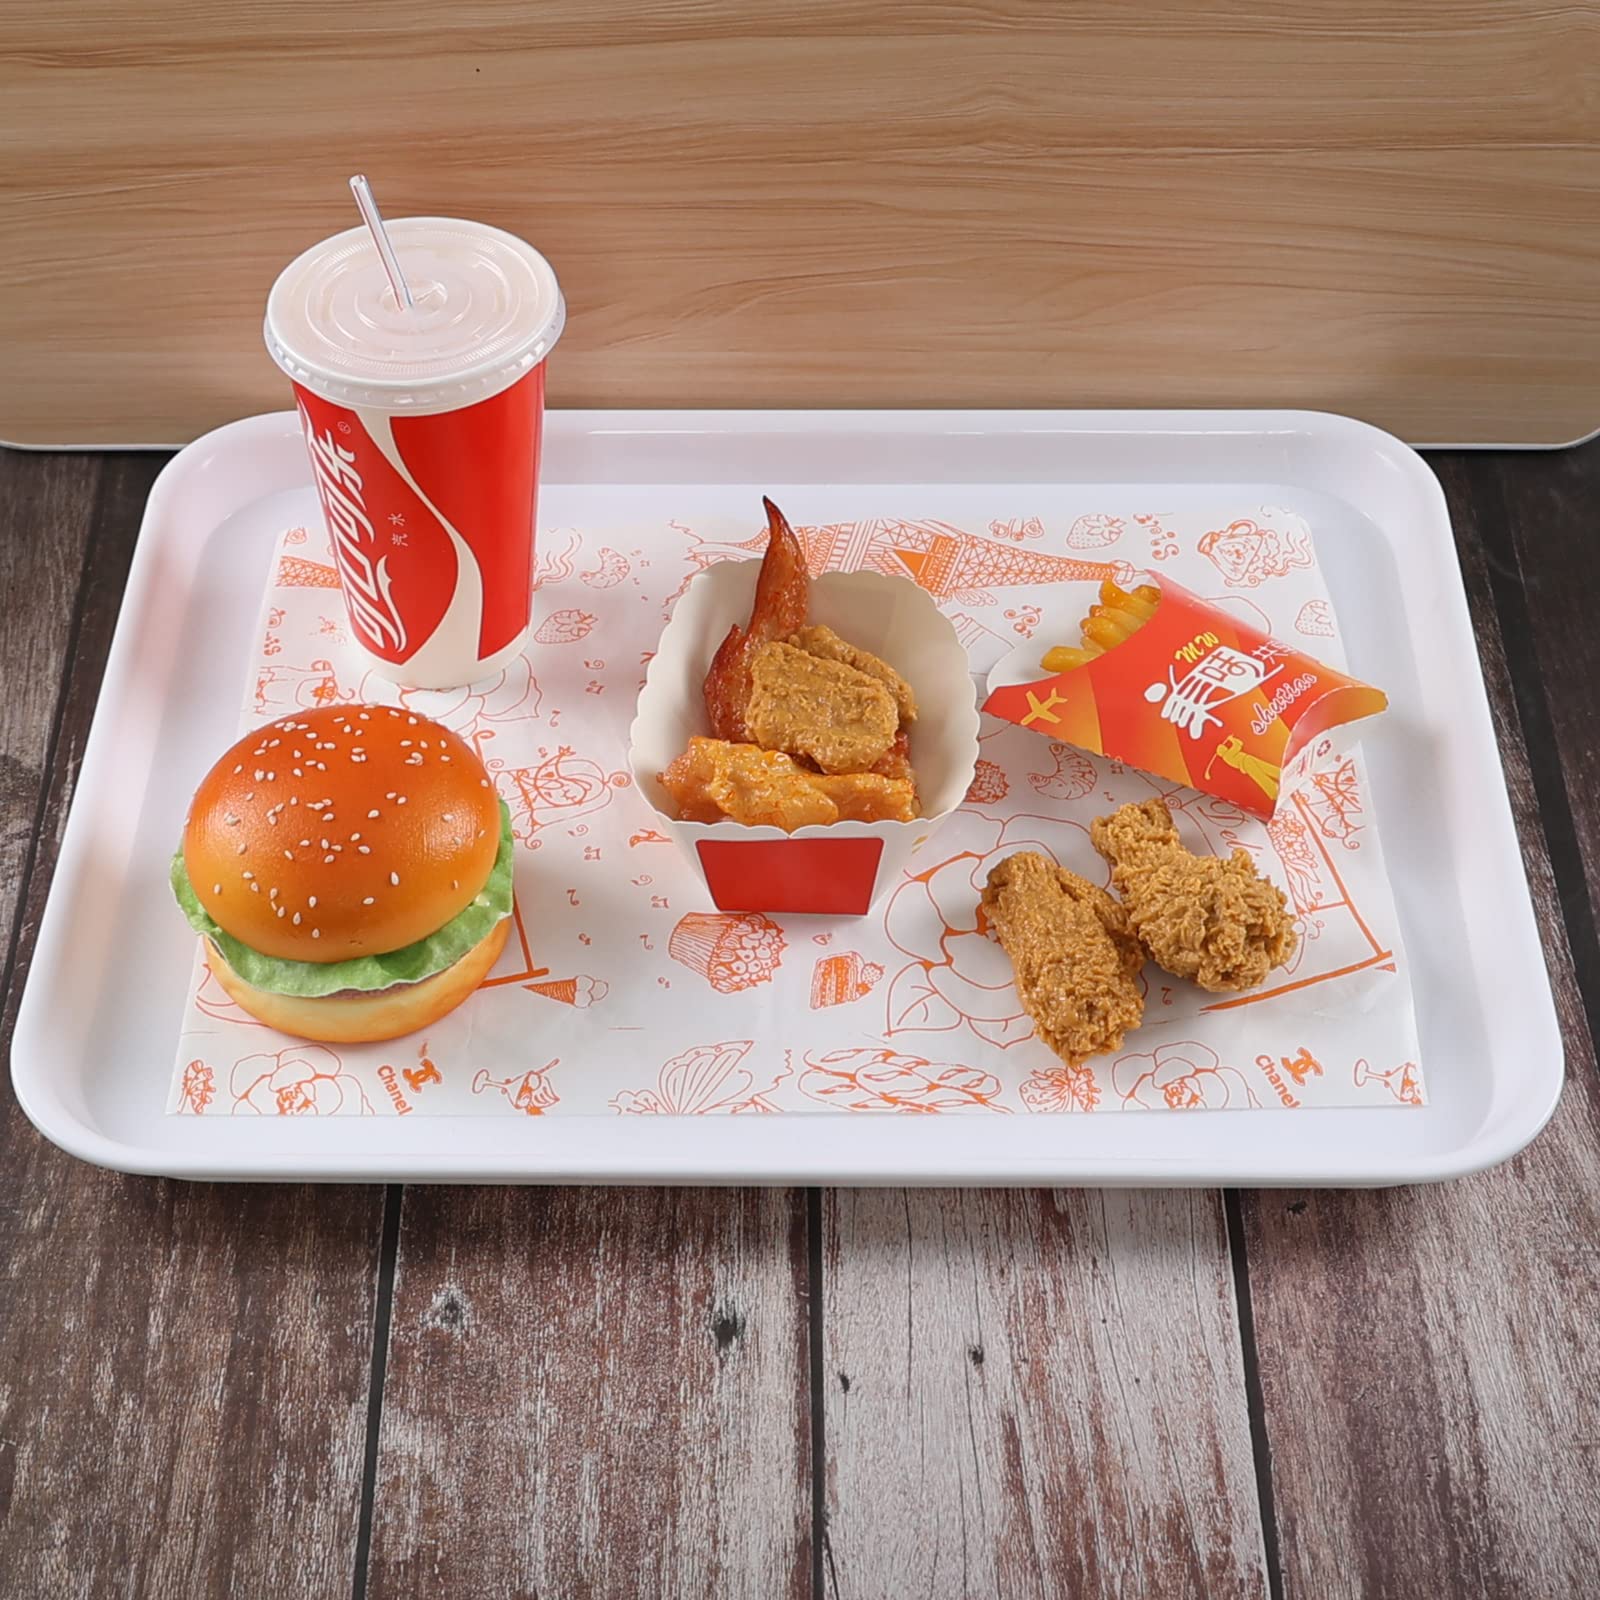 Bblina Plastic Serving Trays, Fast Food Serving Trays Set of 4, White